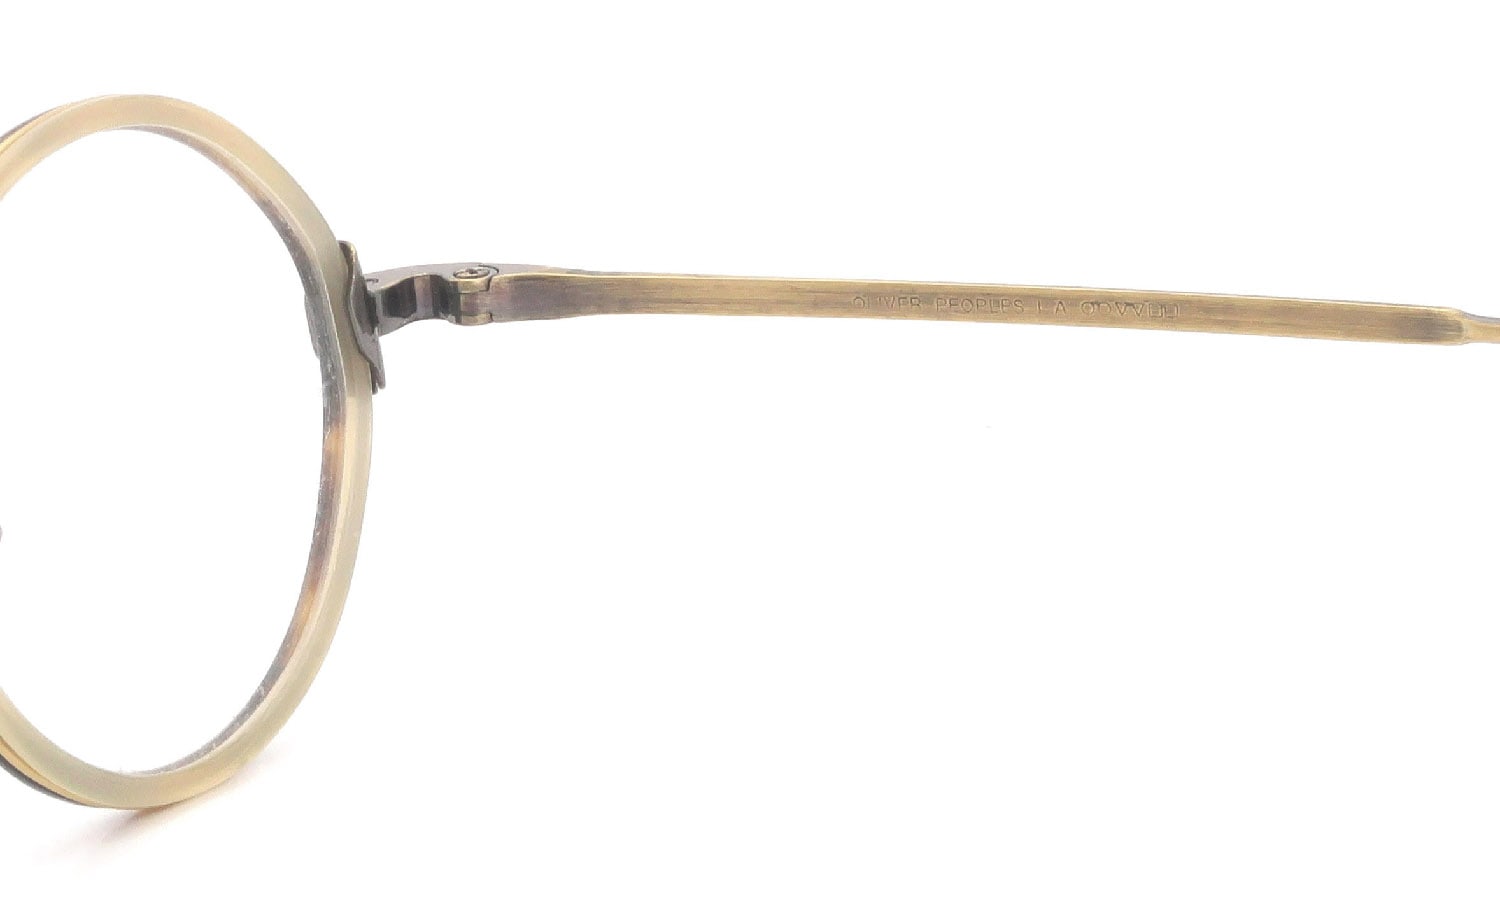 OLIVER PEOPLES 1990's PATTY AG